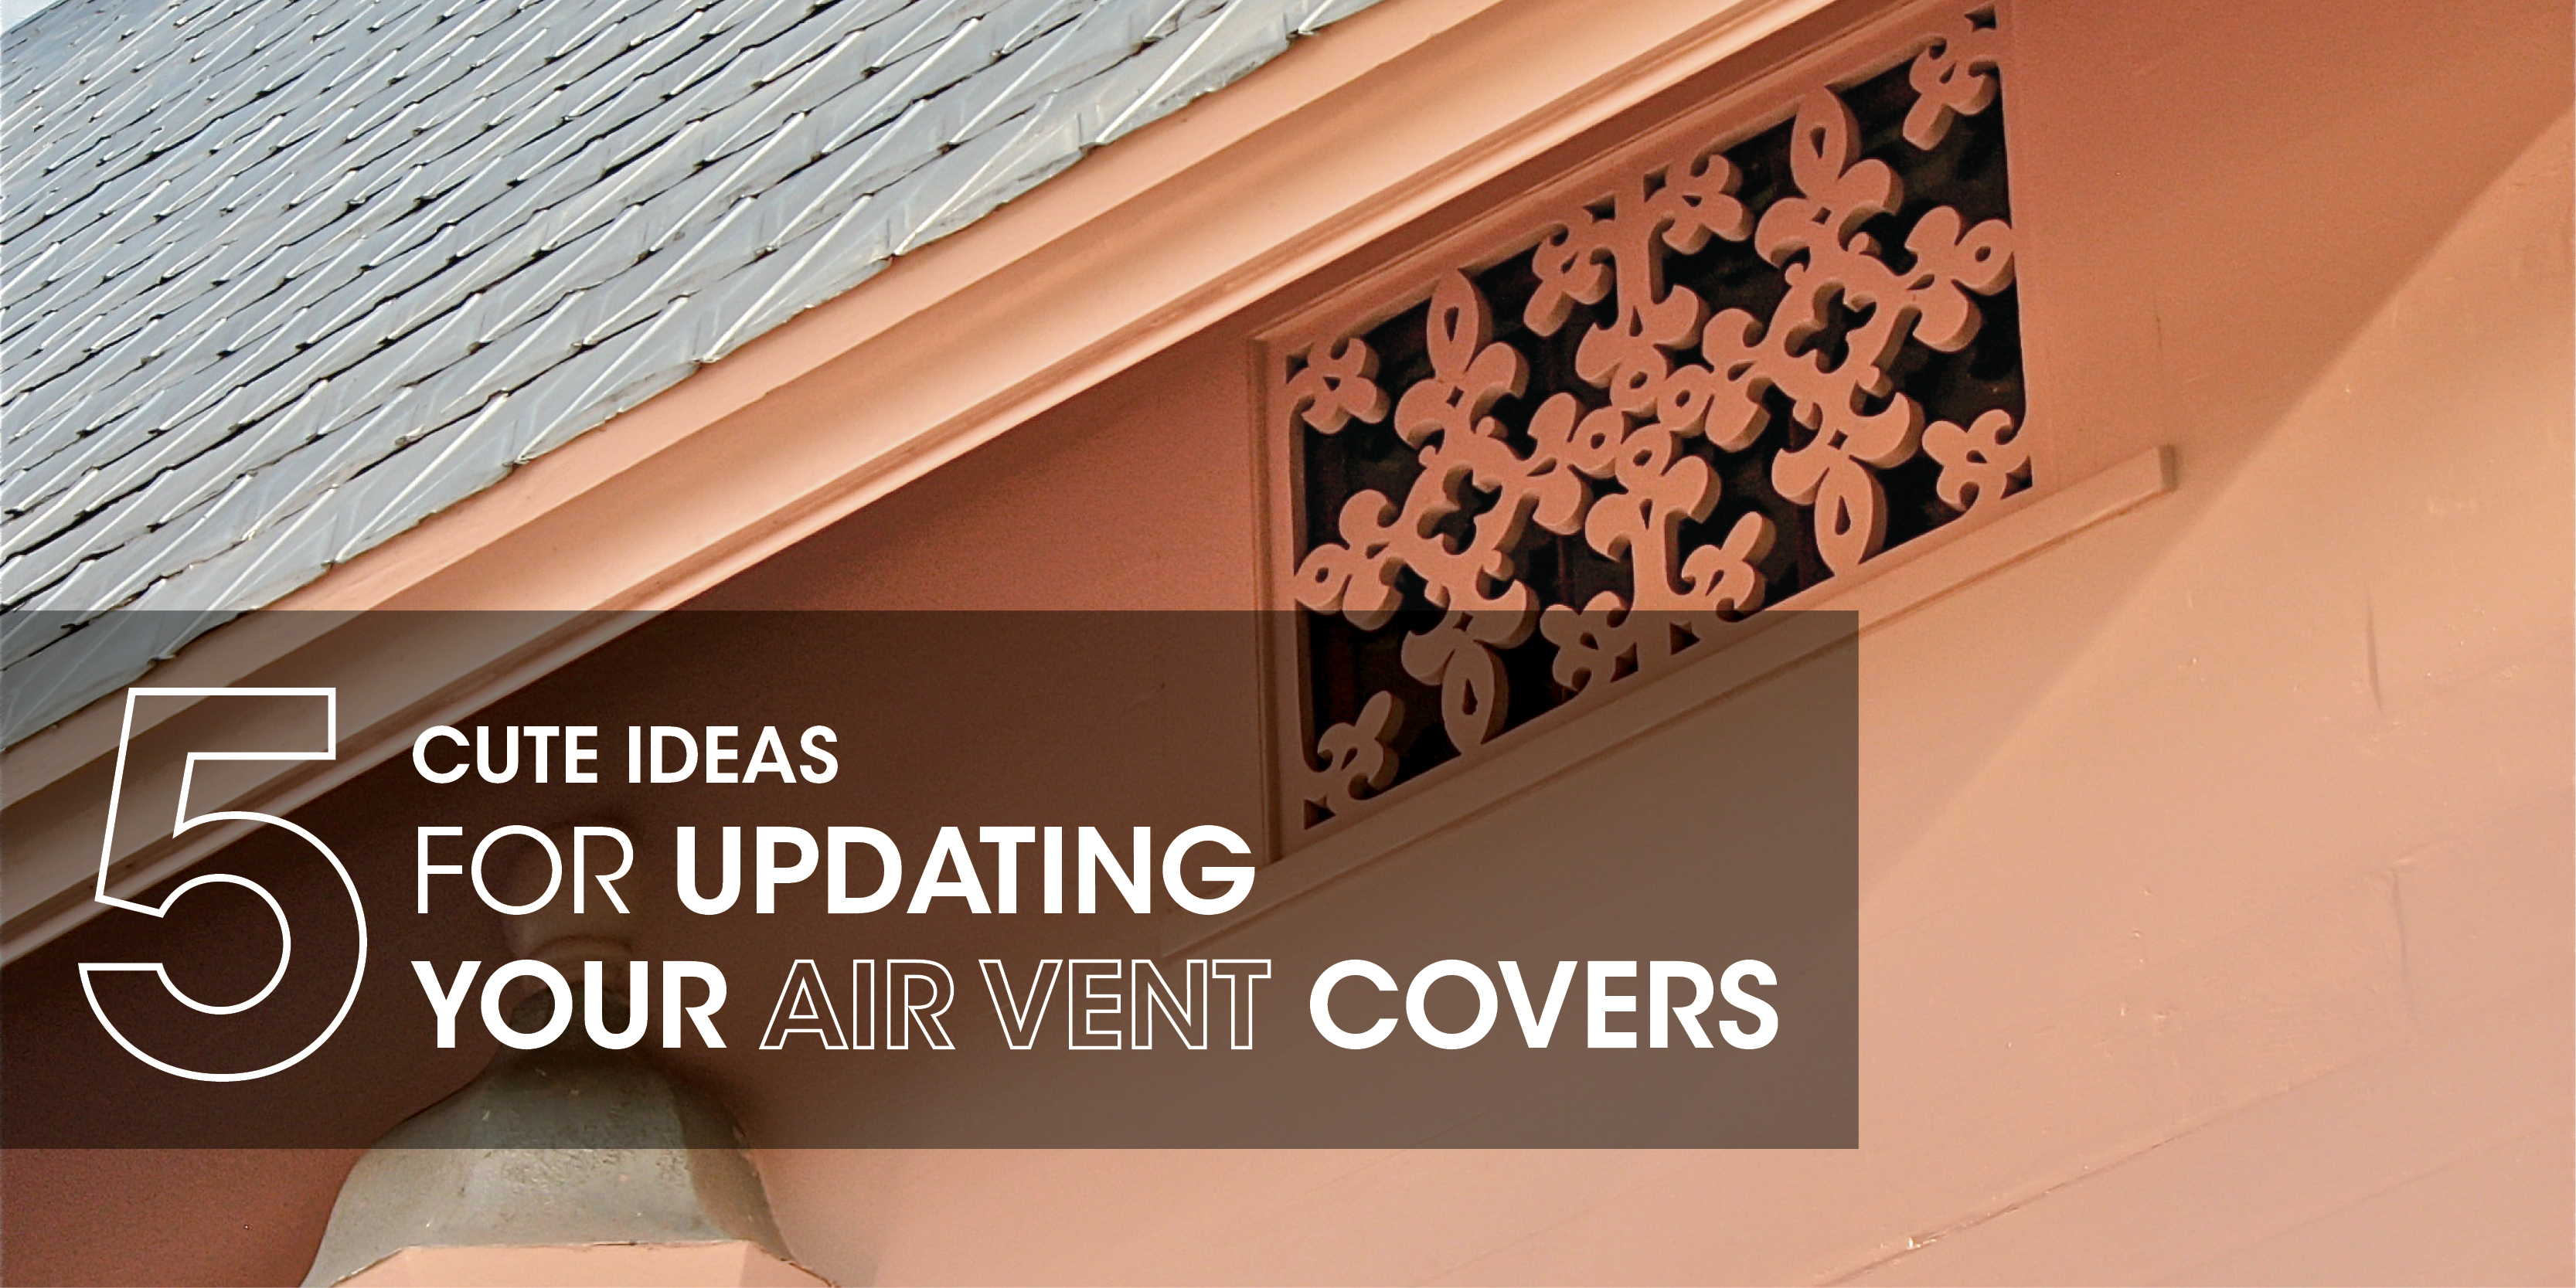 Decorative air vent cover with text: "5 cute ideas for updating your air vent covers"